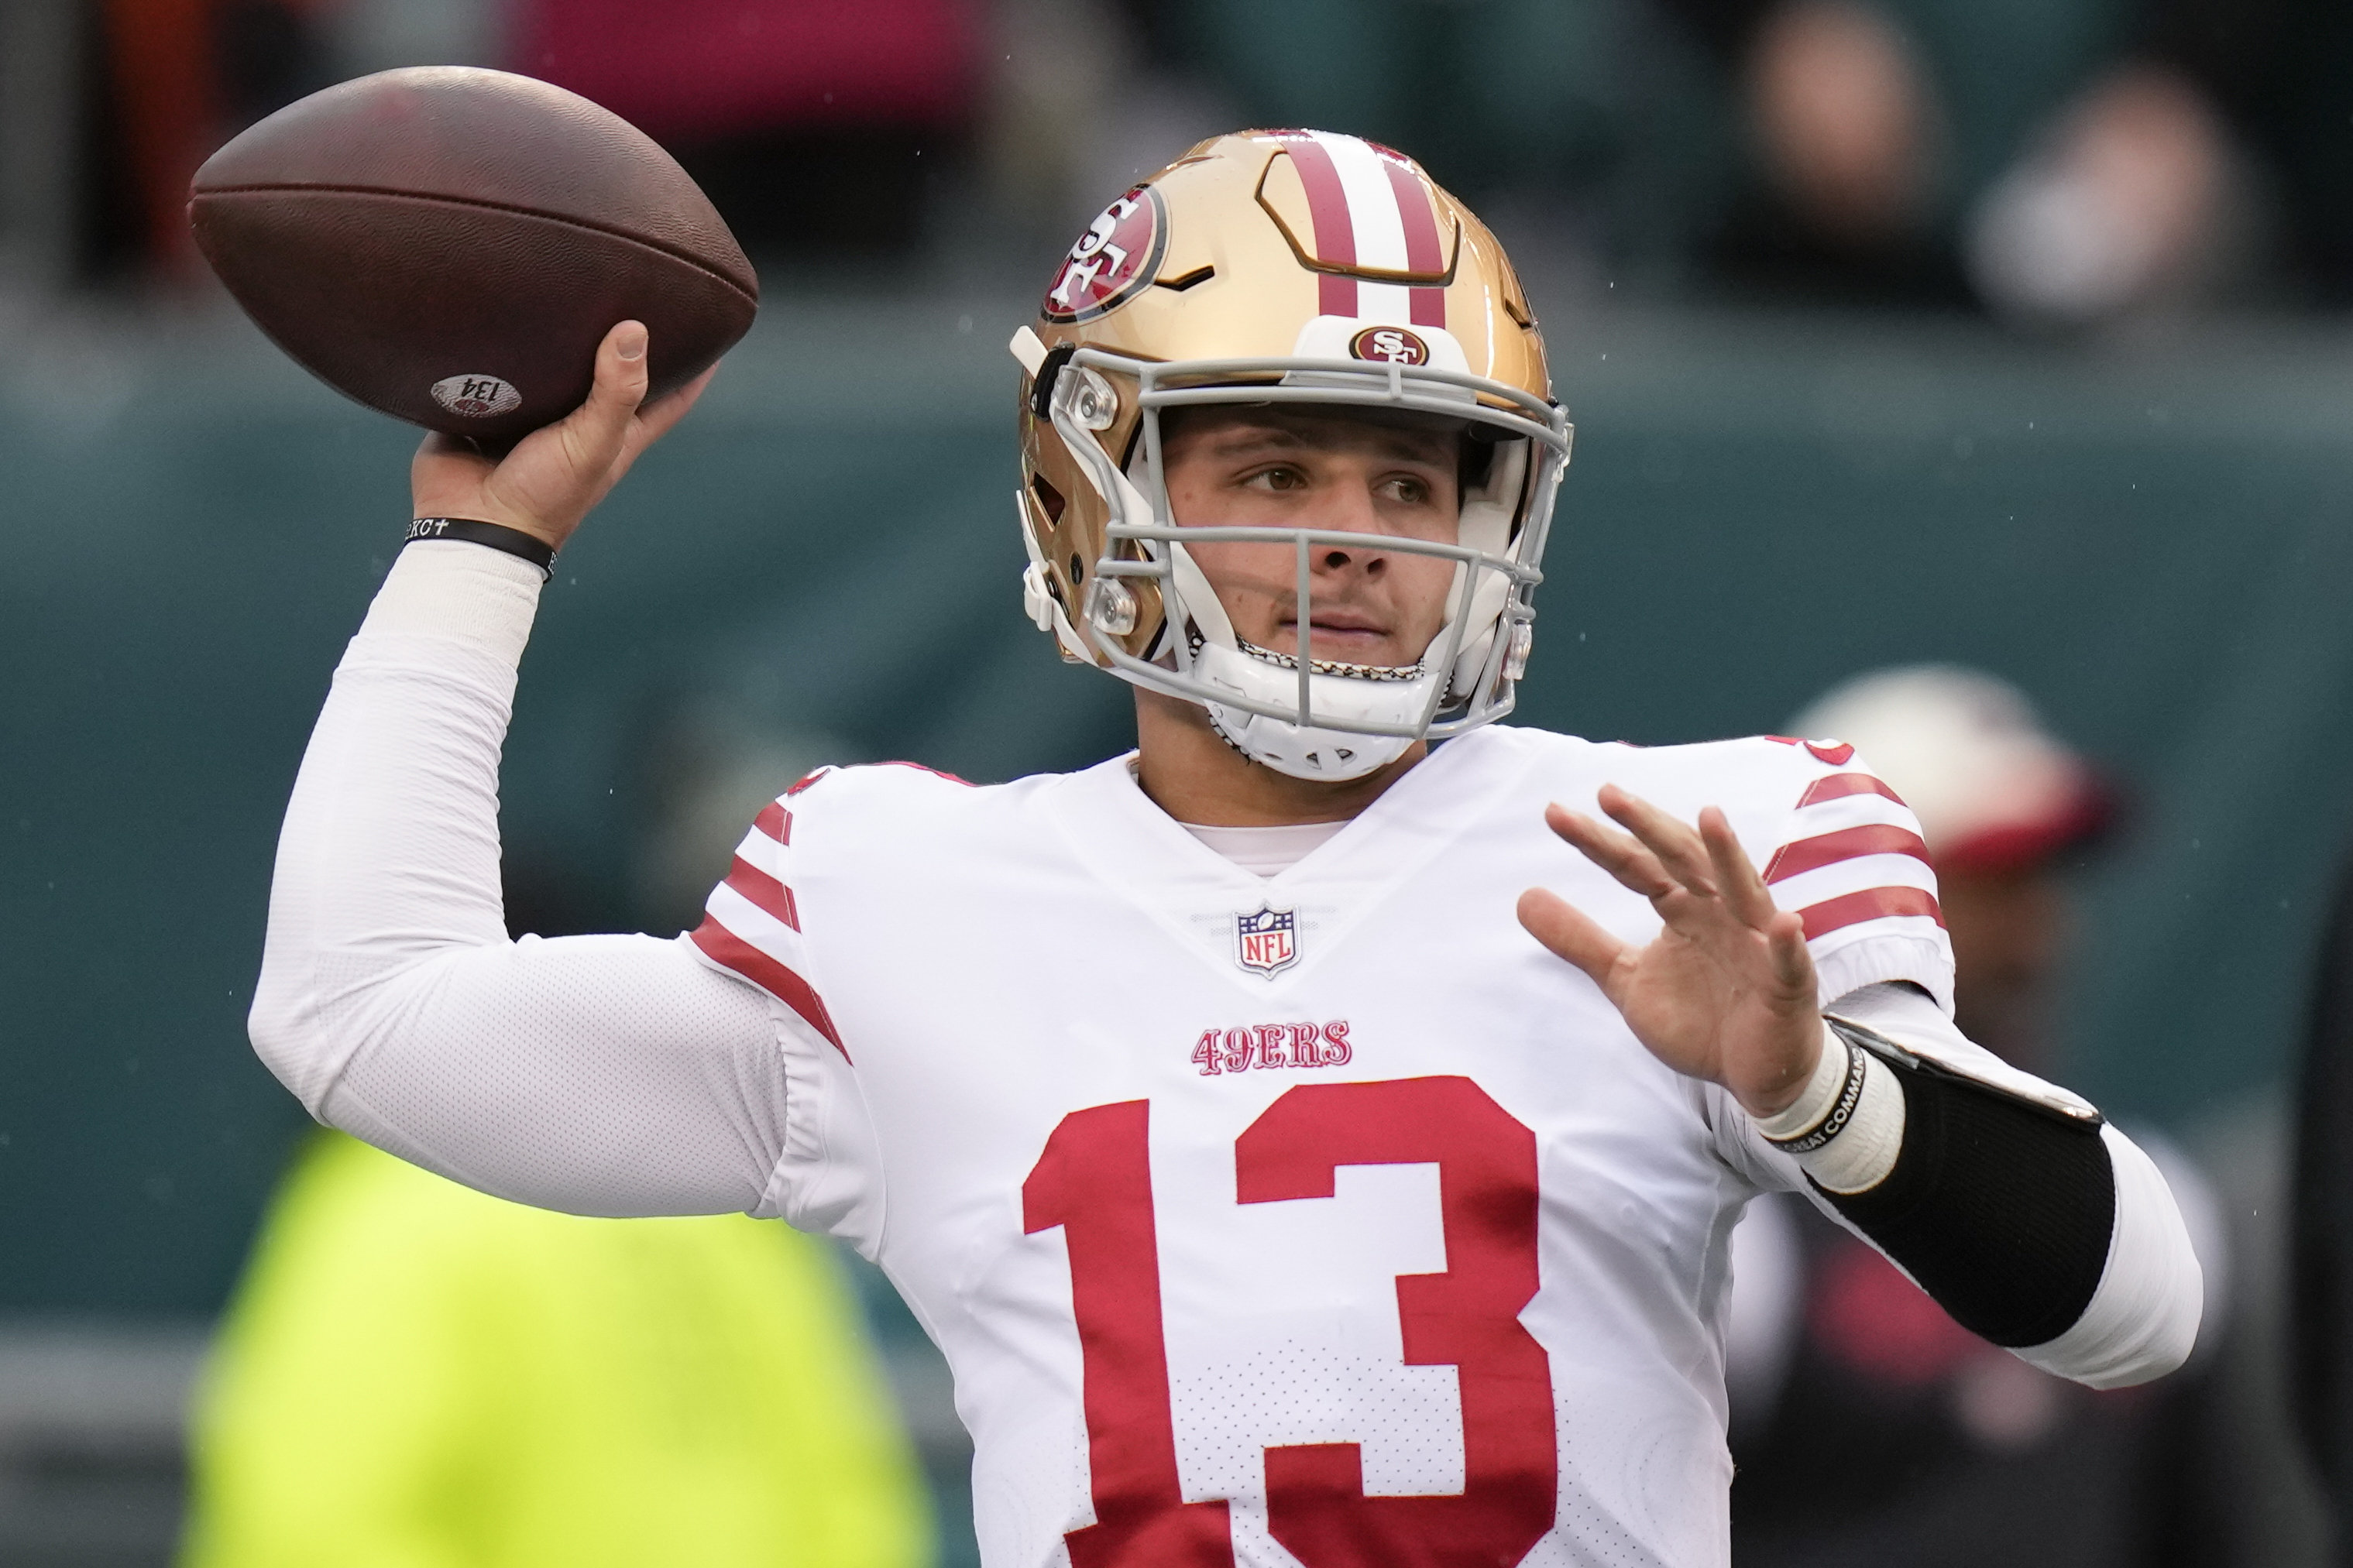 Josh Johnson, the 49ers' 4th string QB playing in NFC Championship,  explained 